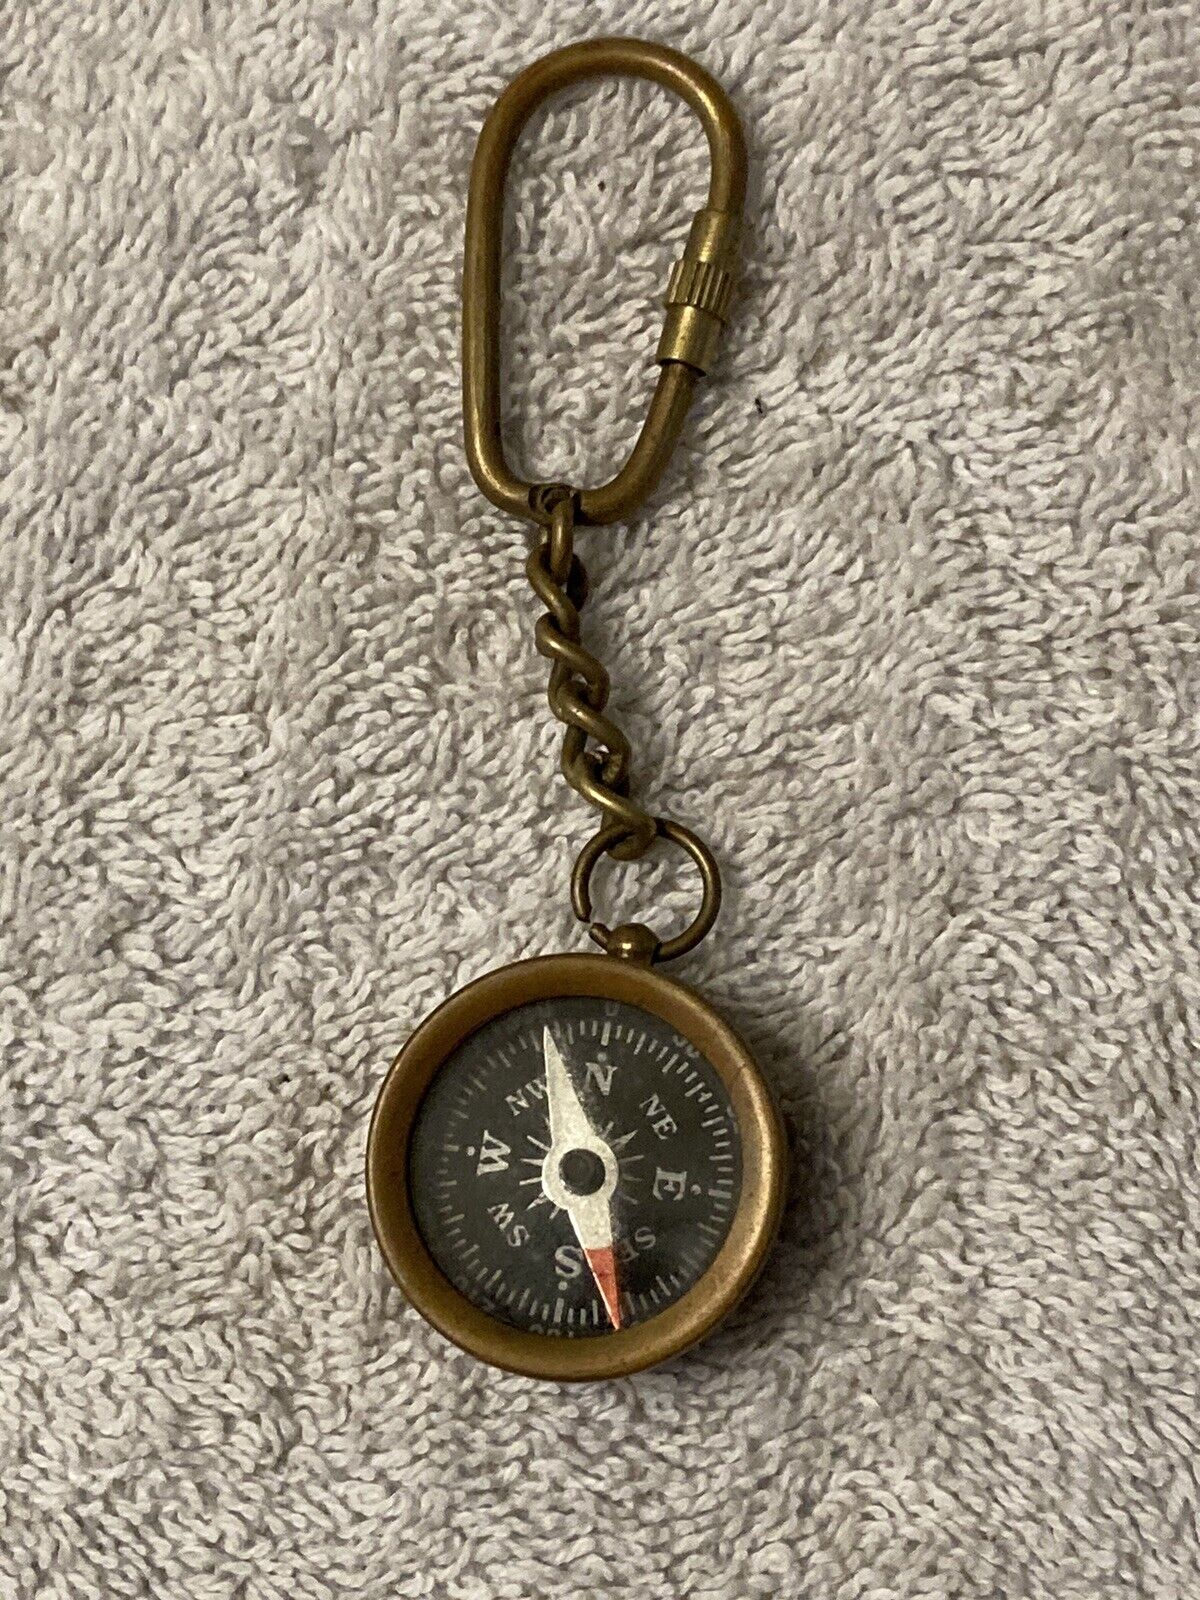 Vintage Compass Keychain, Brass Compass, Pocket, Key ring, Made in India.